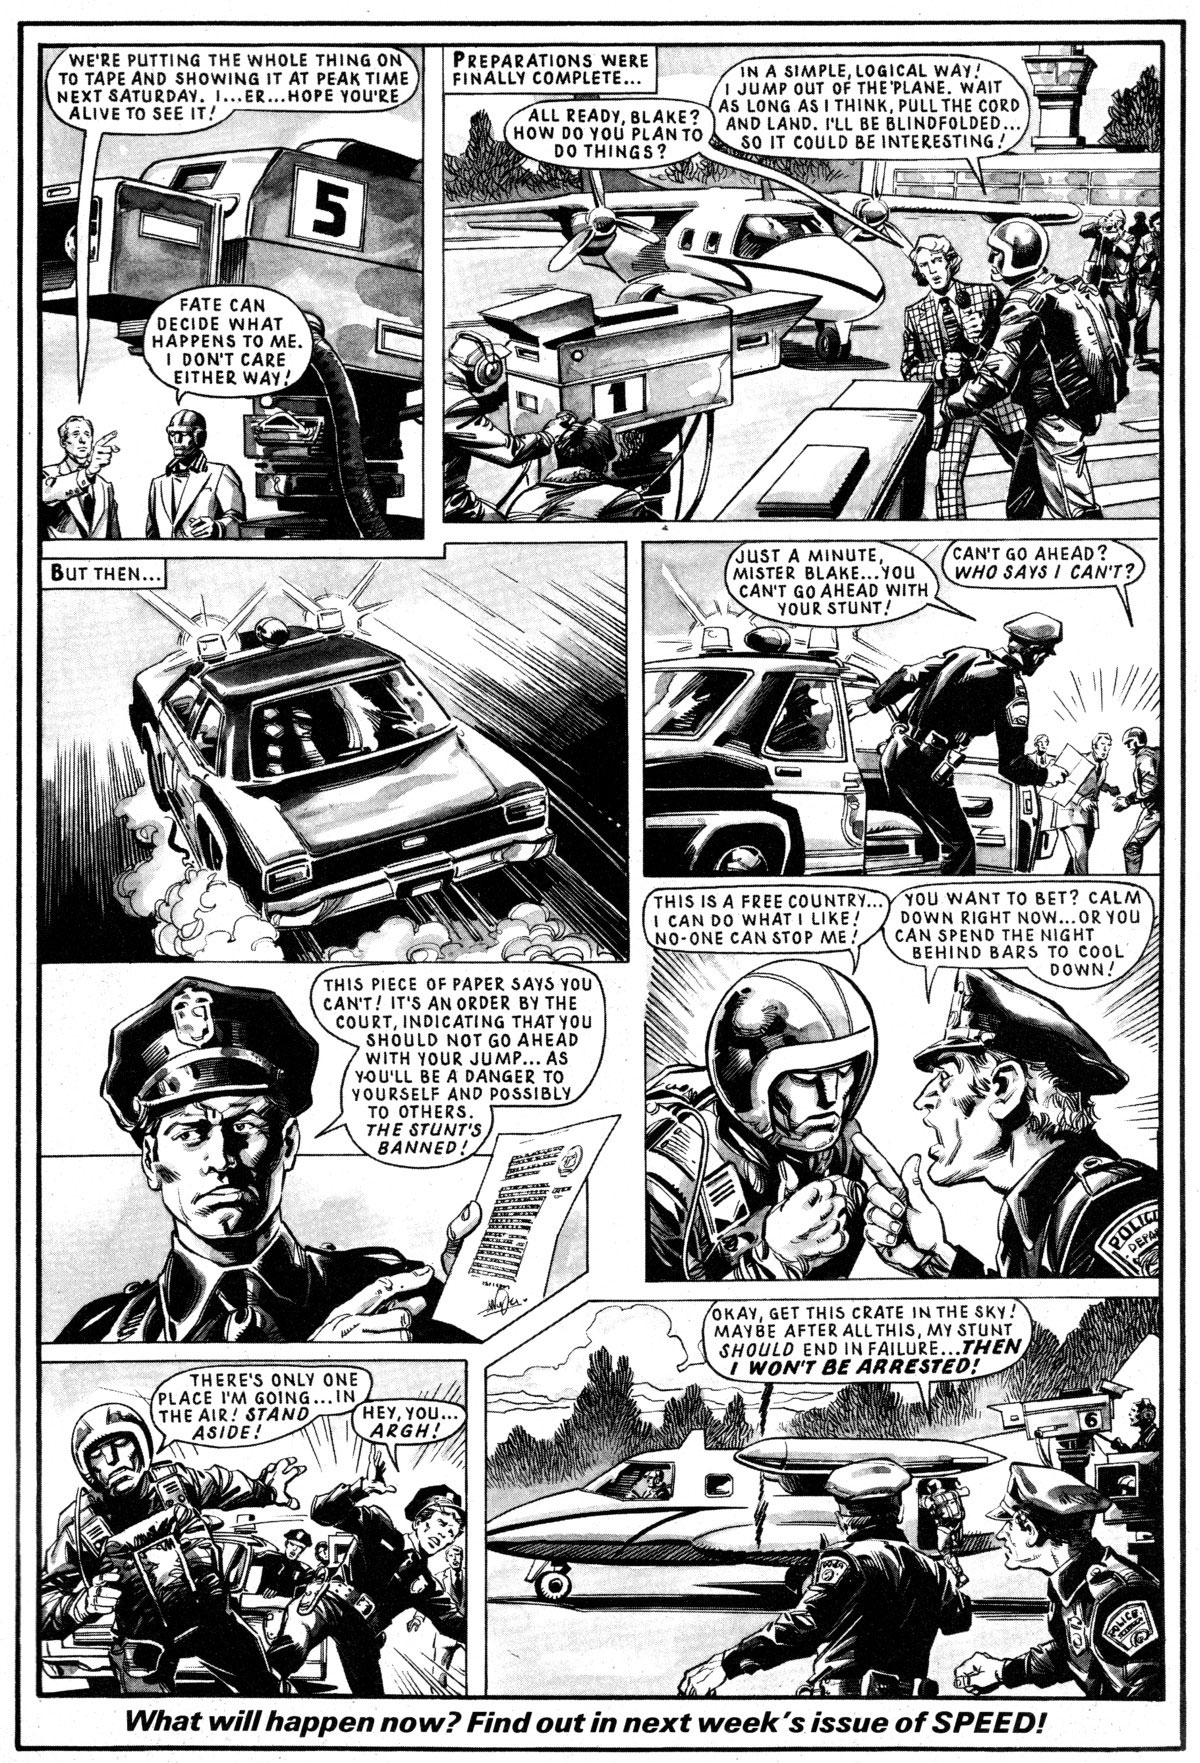 Read online Speed comic -  Issue #9 - 3